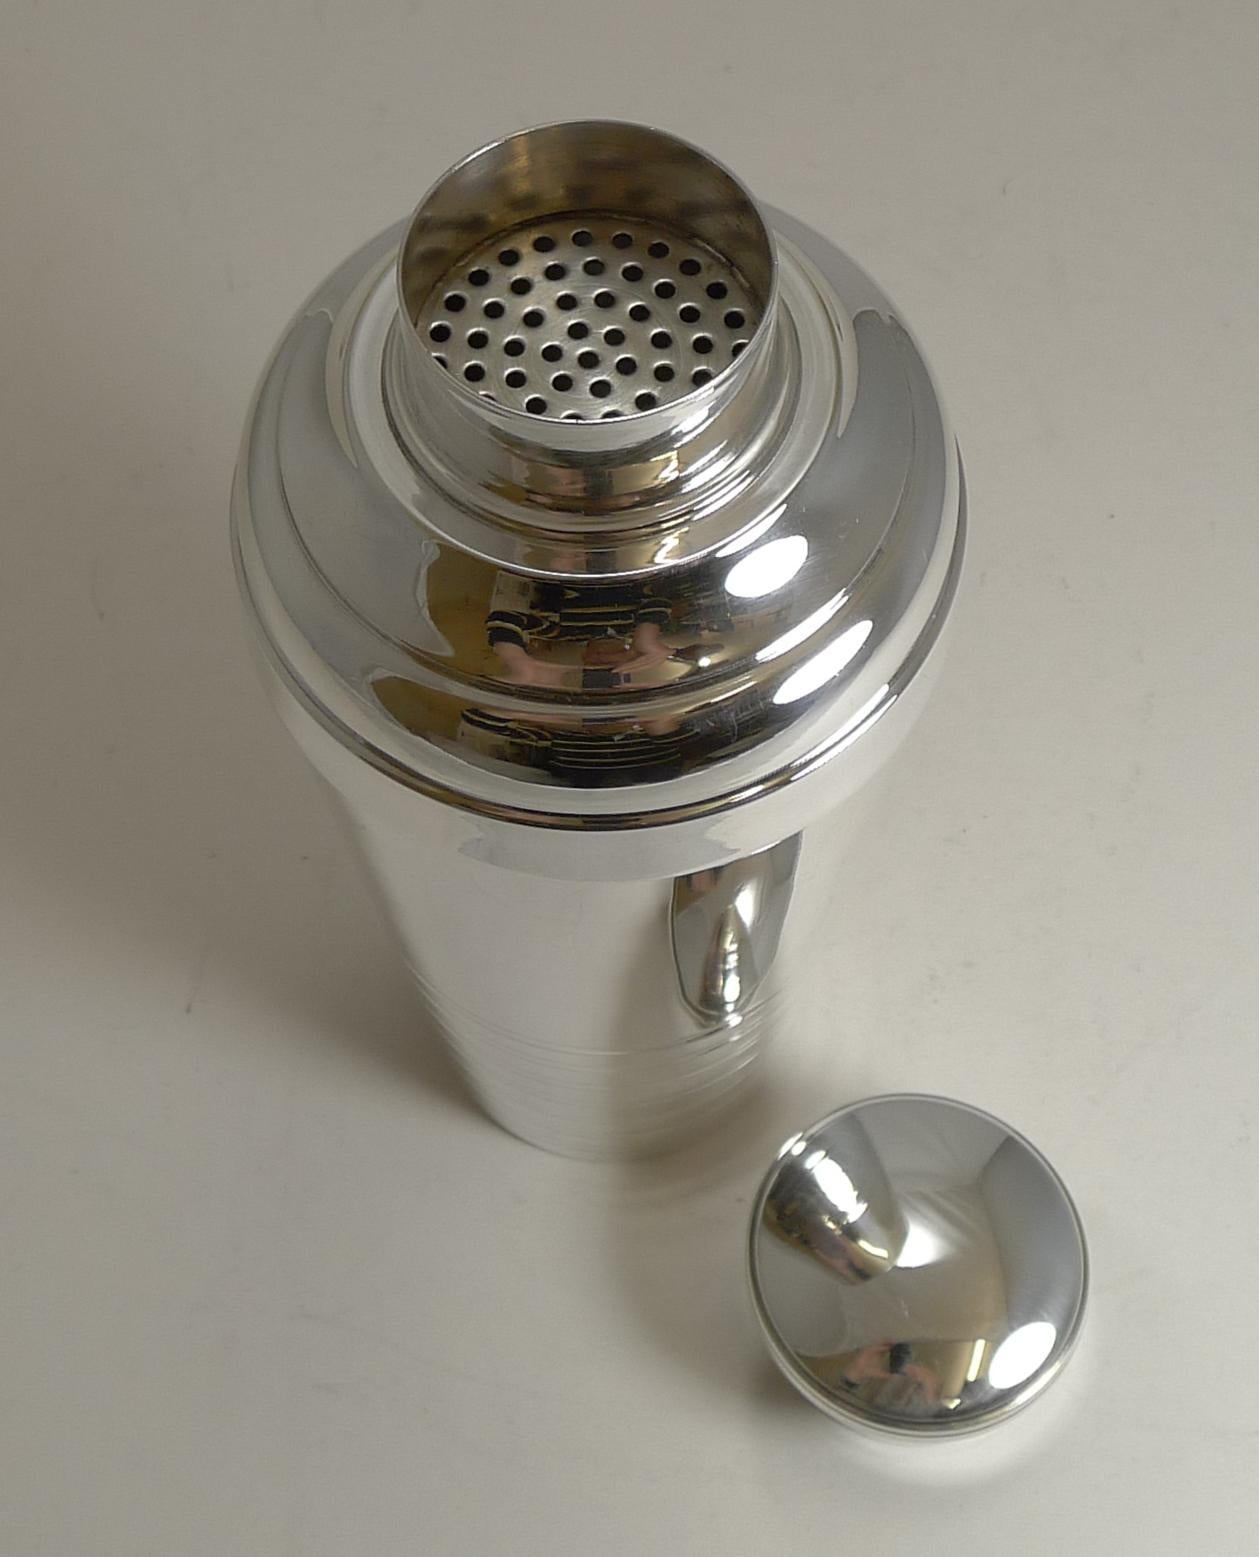 An impressive large Art Deco cocktail shaker, French in origin dating to circa 1930.

Just back from our silversmith, it has been professionally cleaned and polished to it's former glory.

The underside is signed by the silversmith as per the